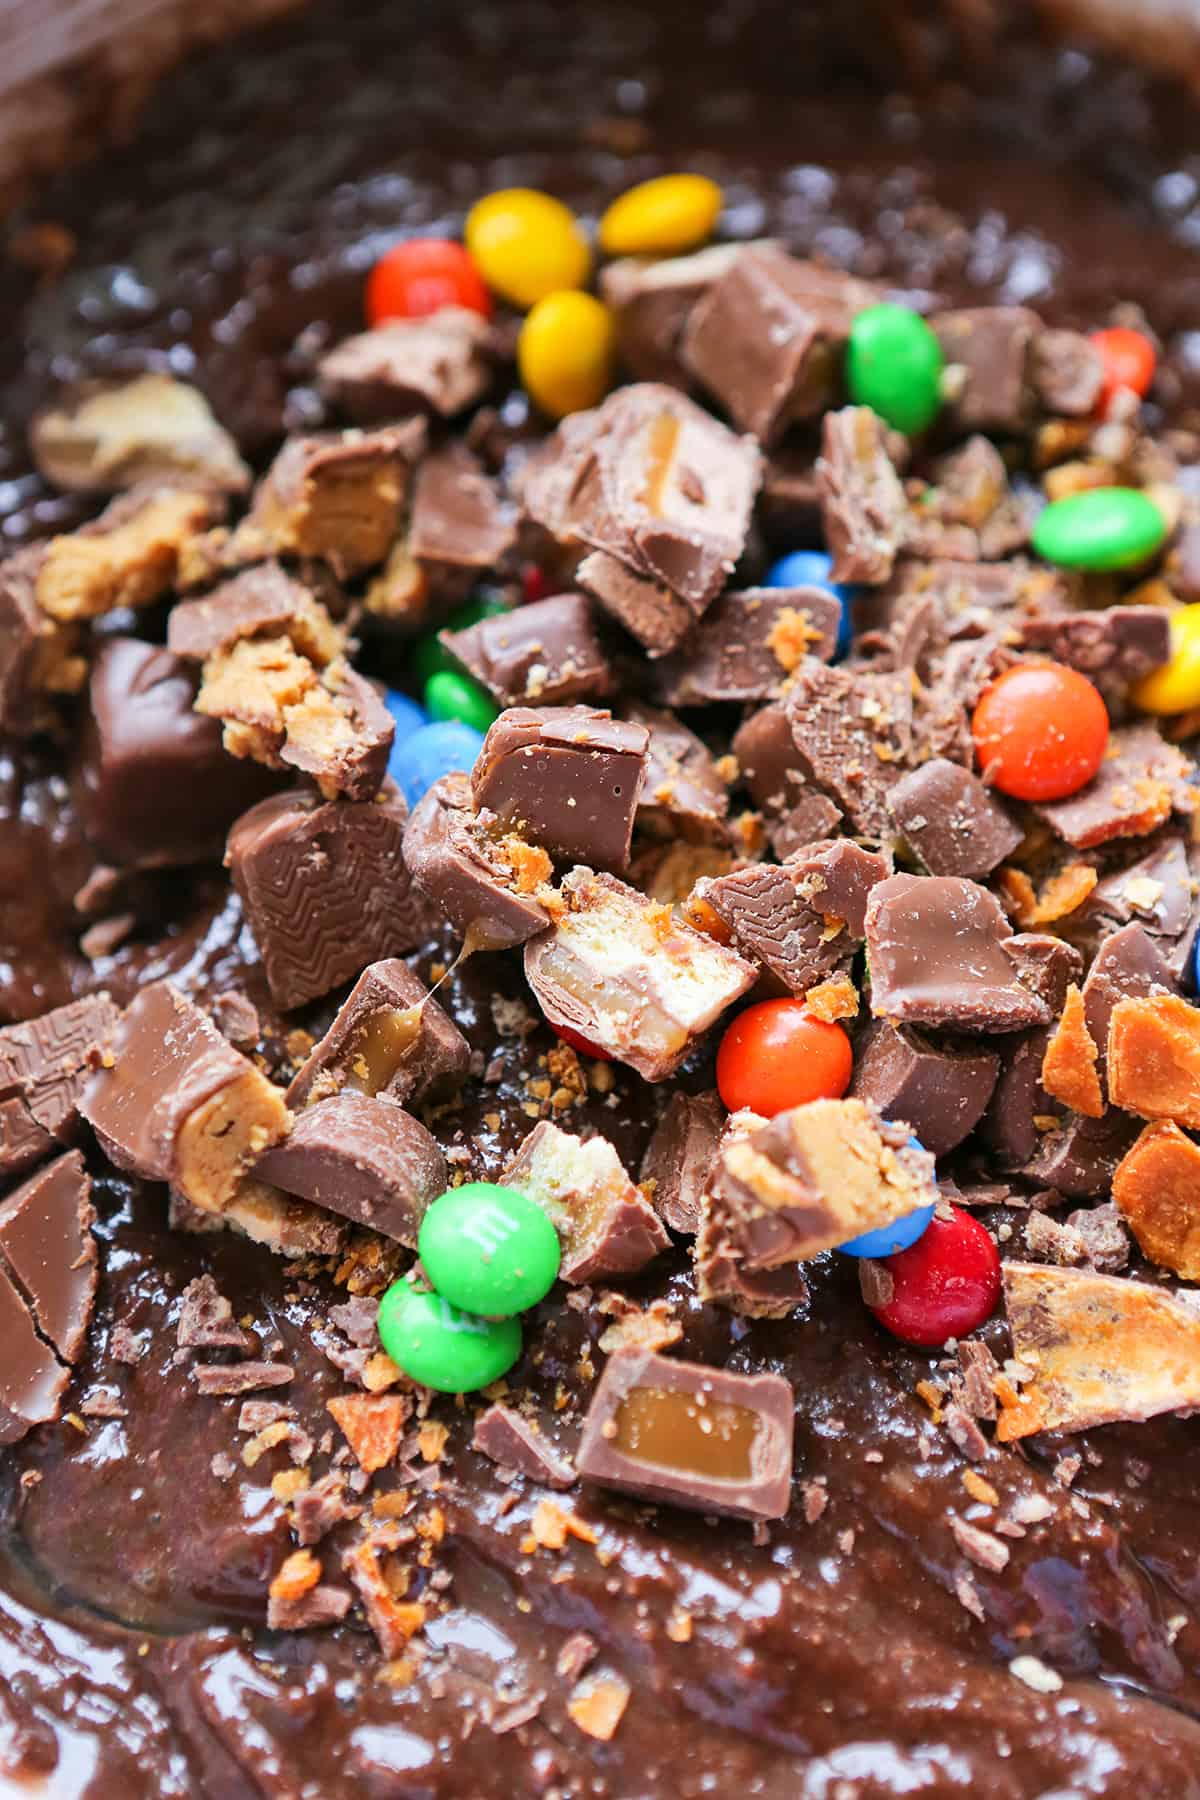 Candy bar pieces in brownie batter.